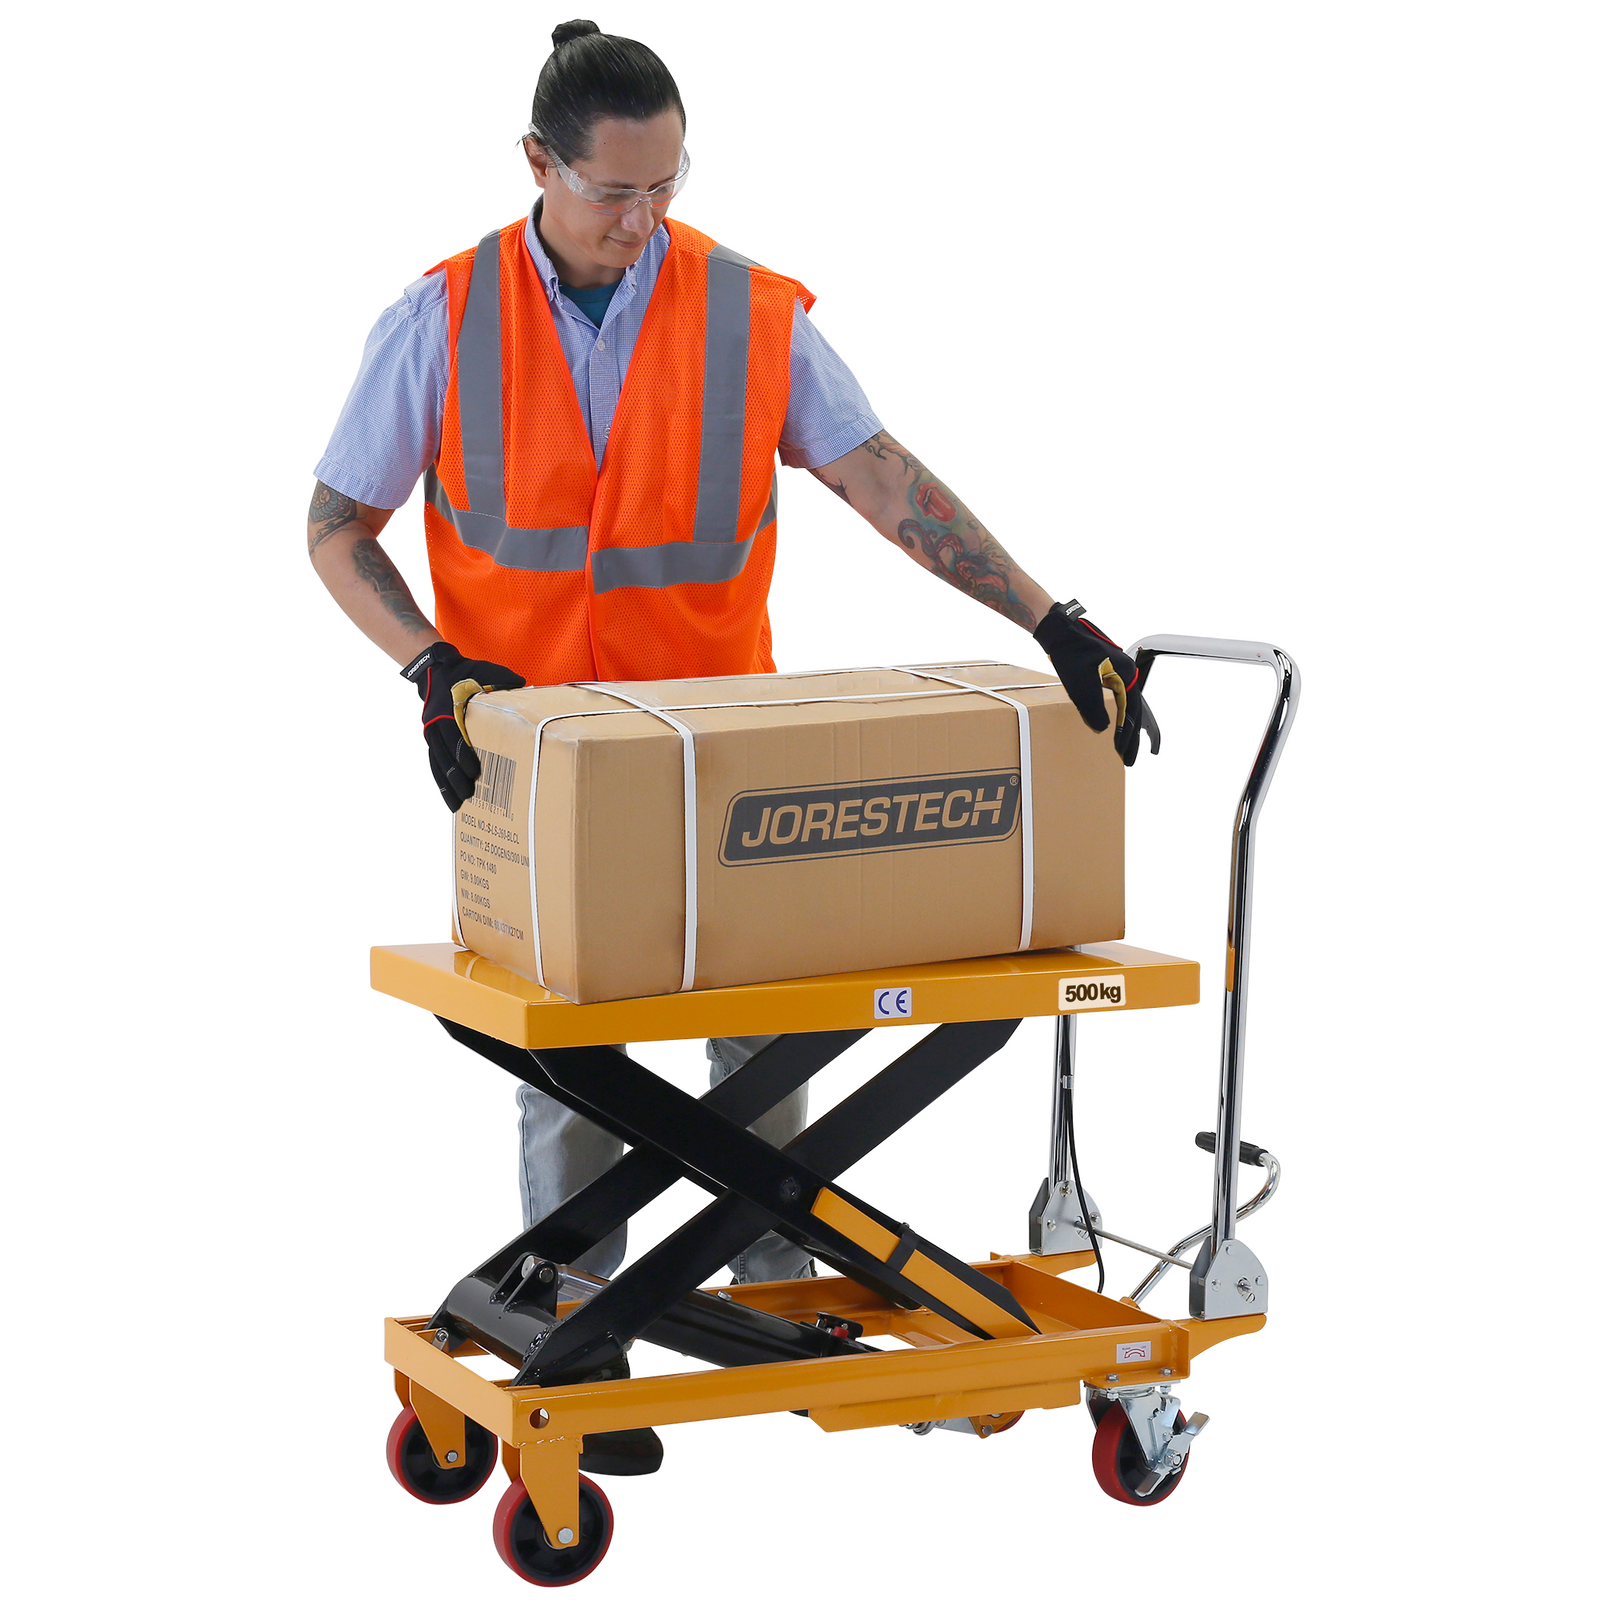 A man wearing an orange safety vest is removing a heavy box from the table lift at a comfortable height because the JORESTECH scissor table for 1100 pounds is lifted